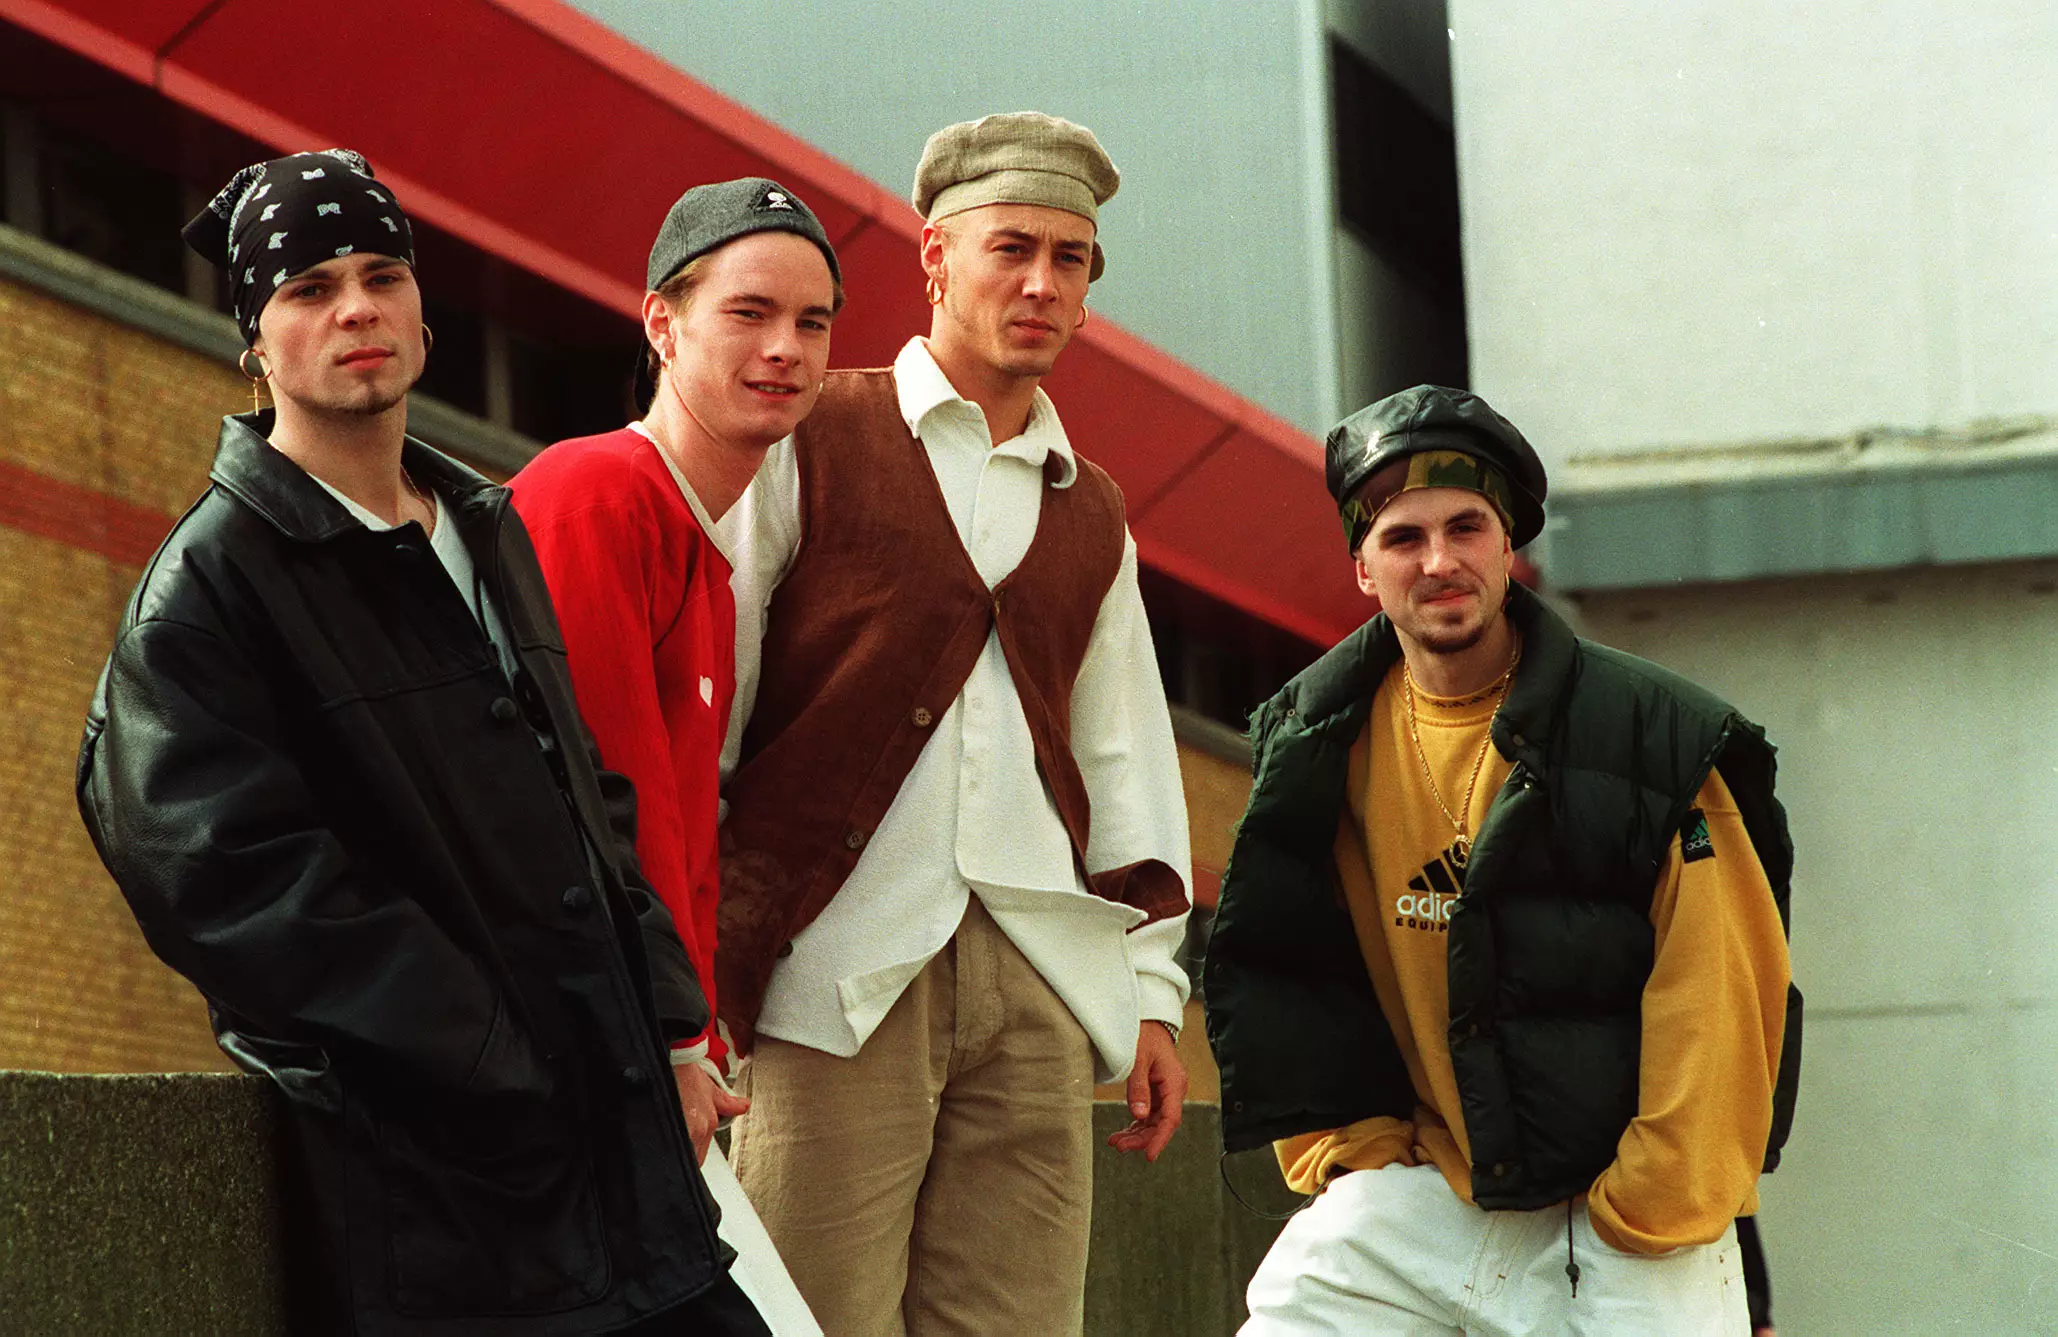 East 17 topped the charts with their hit 'Stay Another Day'.